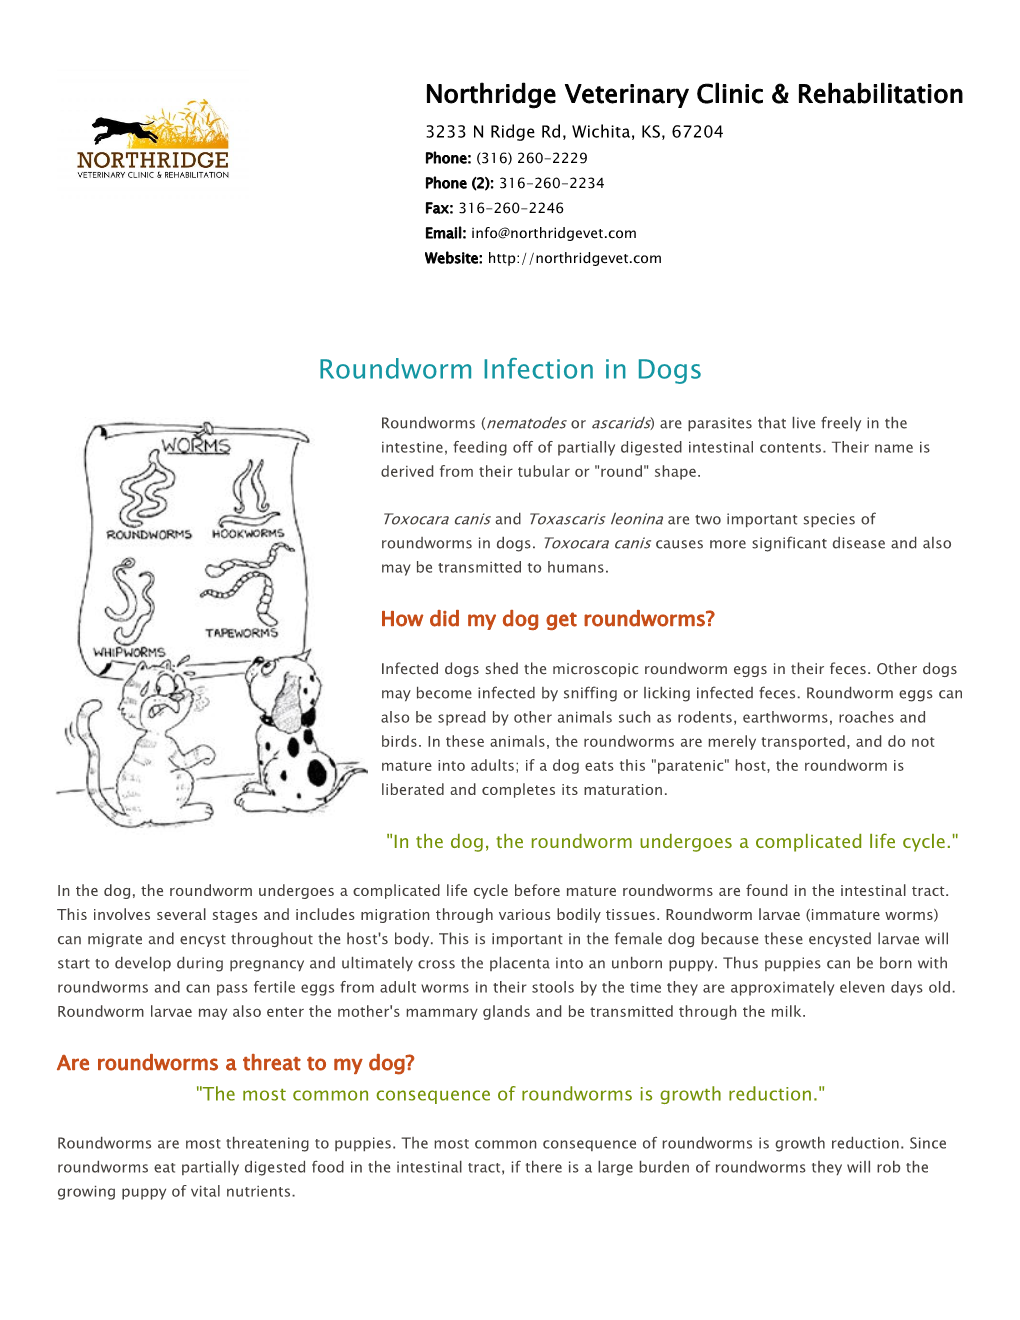 Roundworm Infection in Dogs